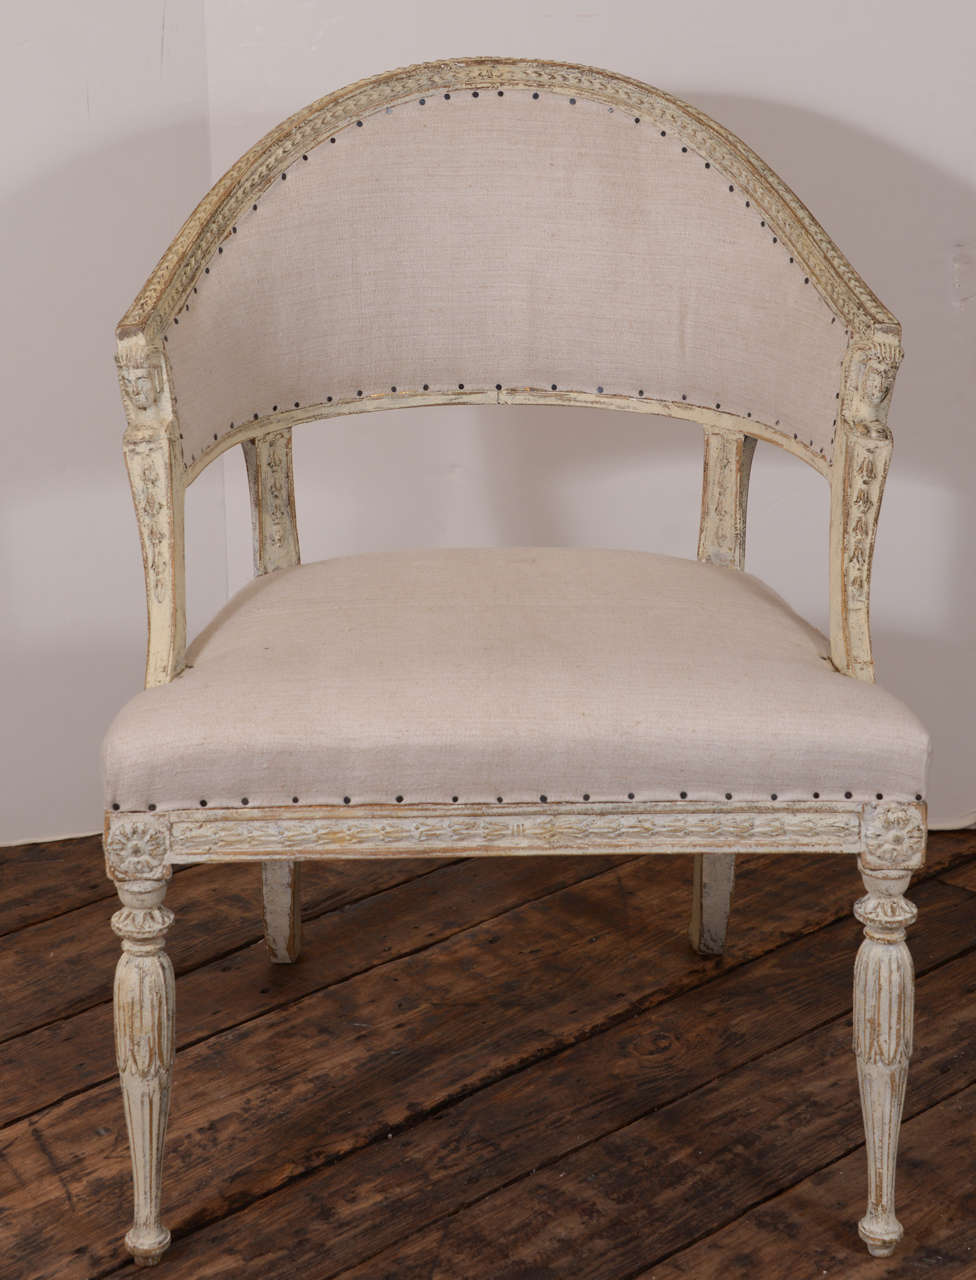 Stunning set of 4 Gustavian Barrel back chairs in original paint. Upholstered in an antique linen.